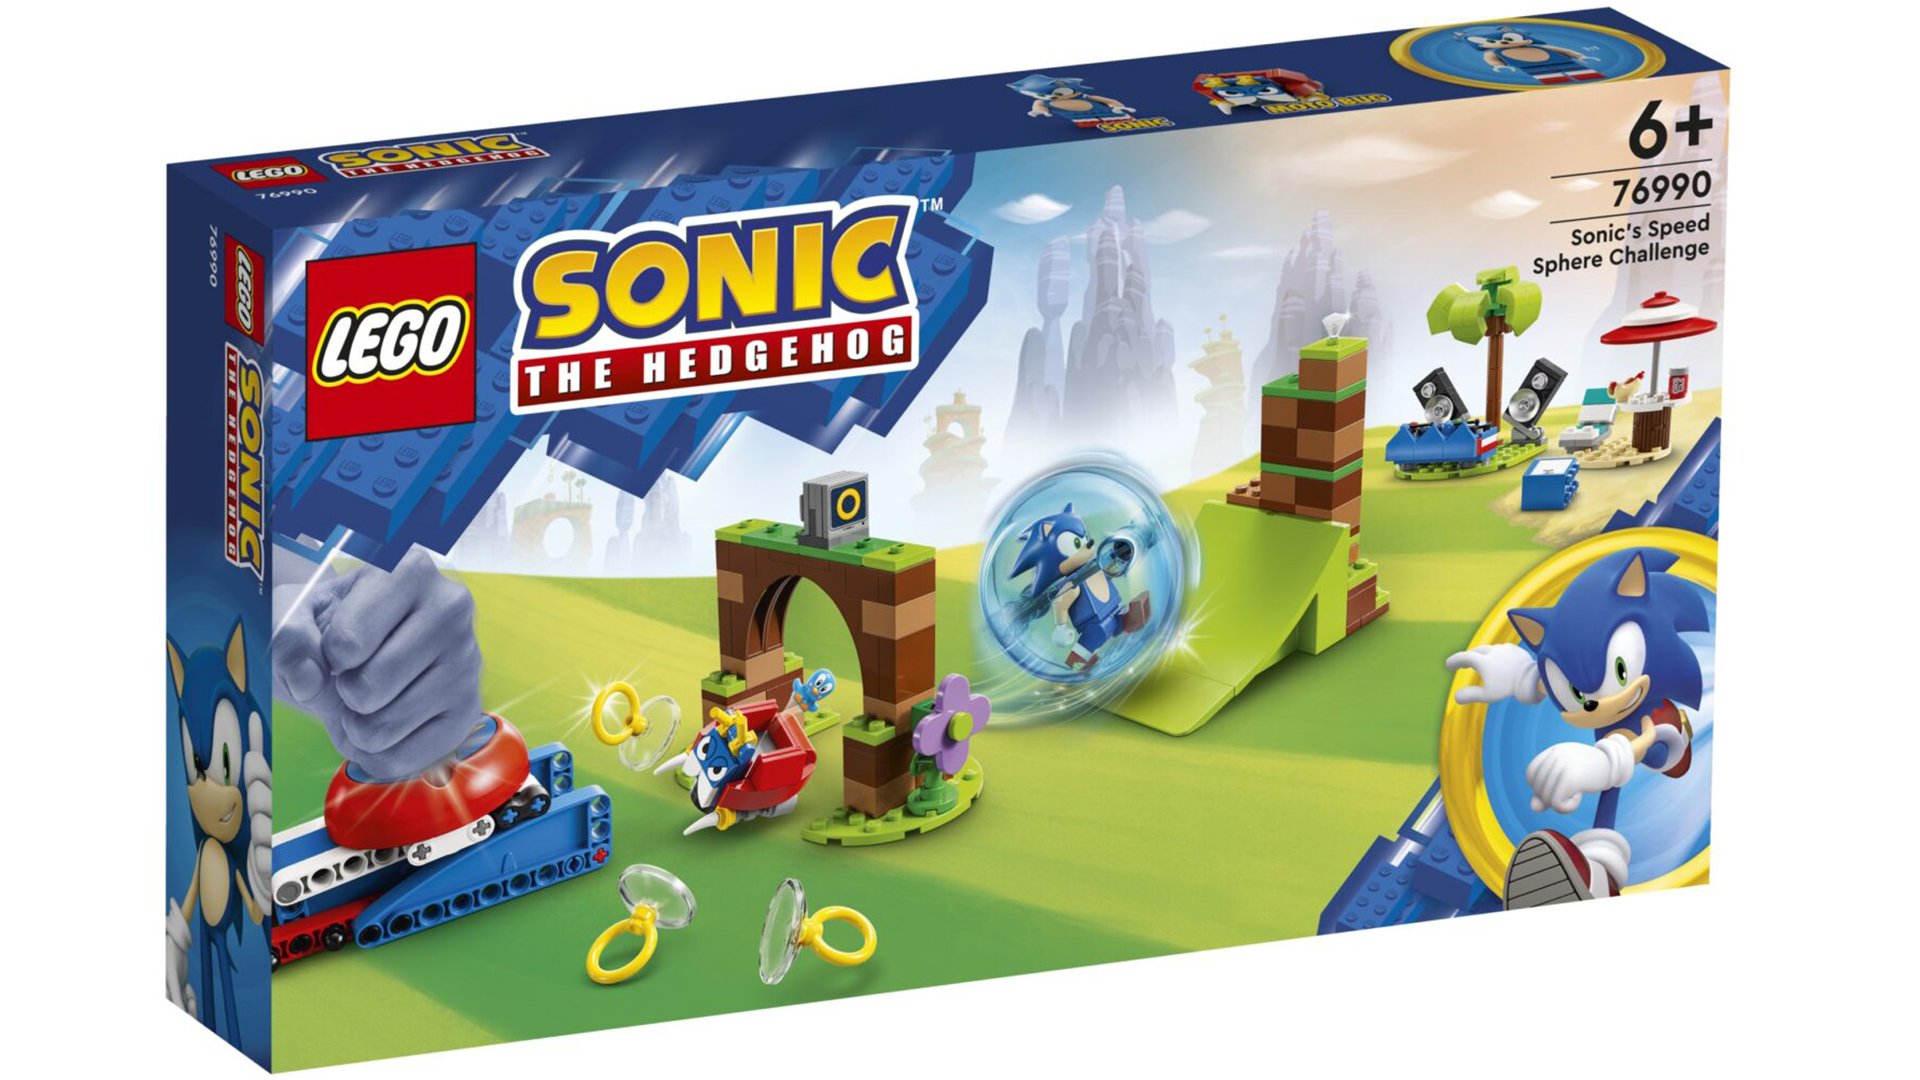 Four new Lego Sonic sets have been revealed VGC